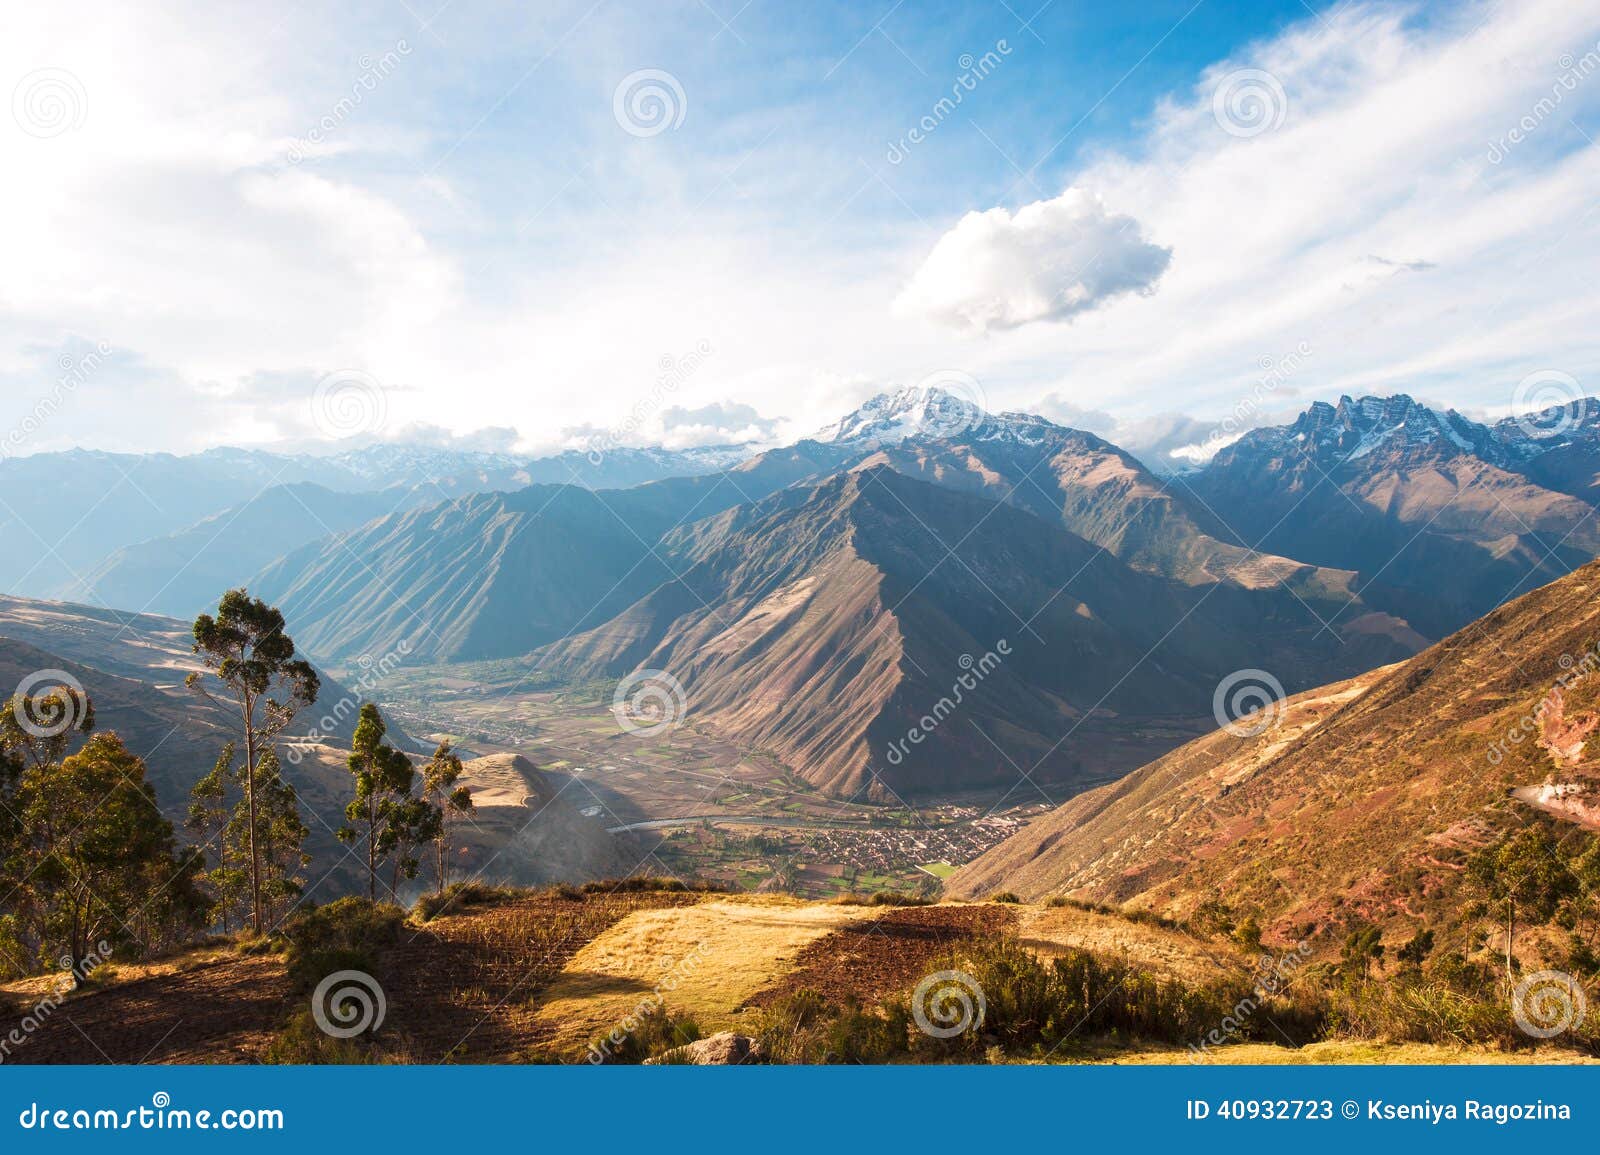 sacred valley harvested wheat field in urubamba valley in peru